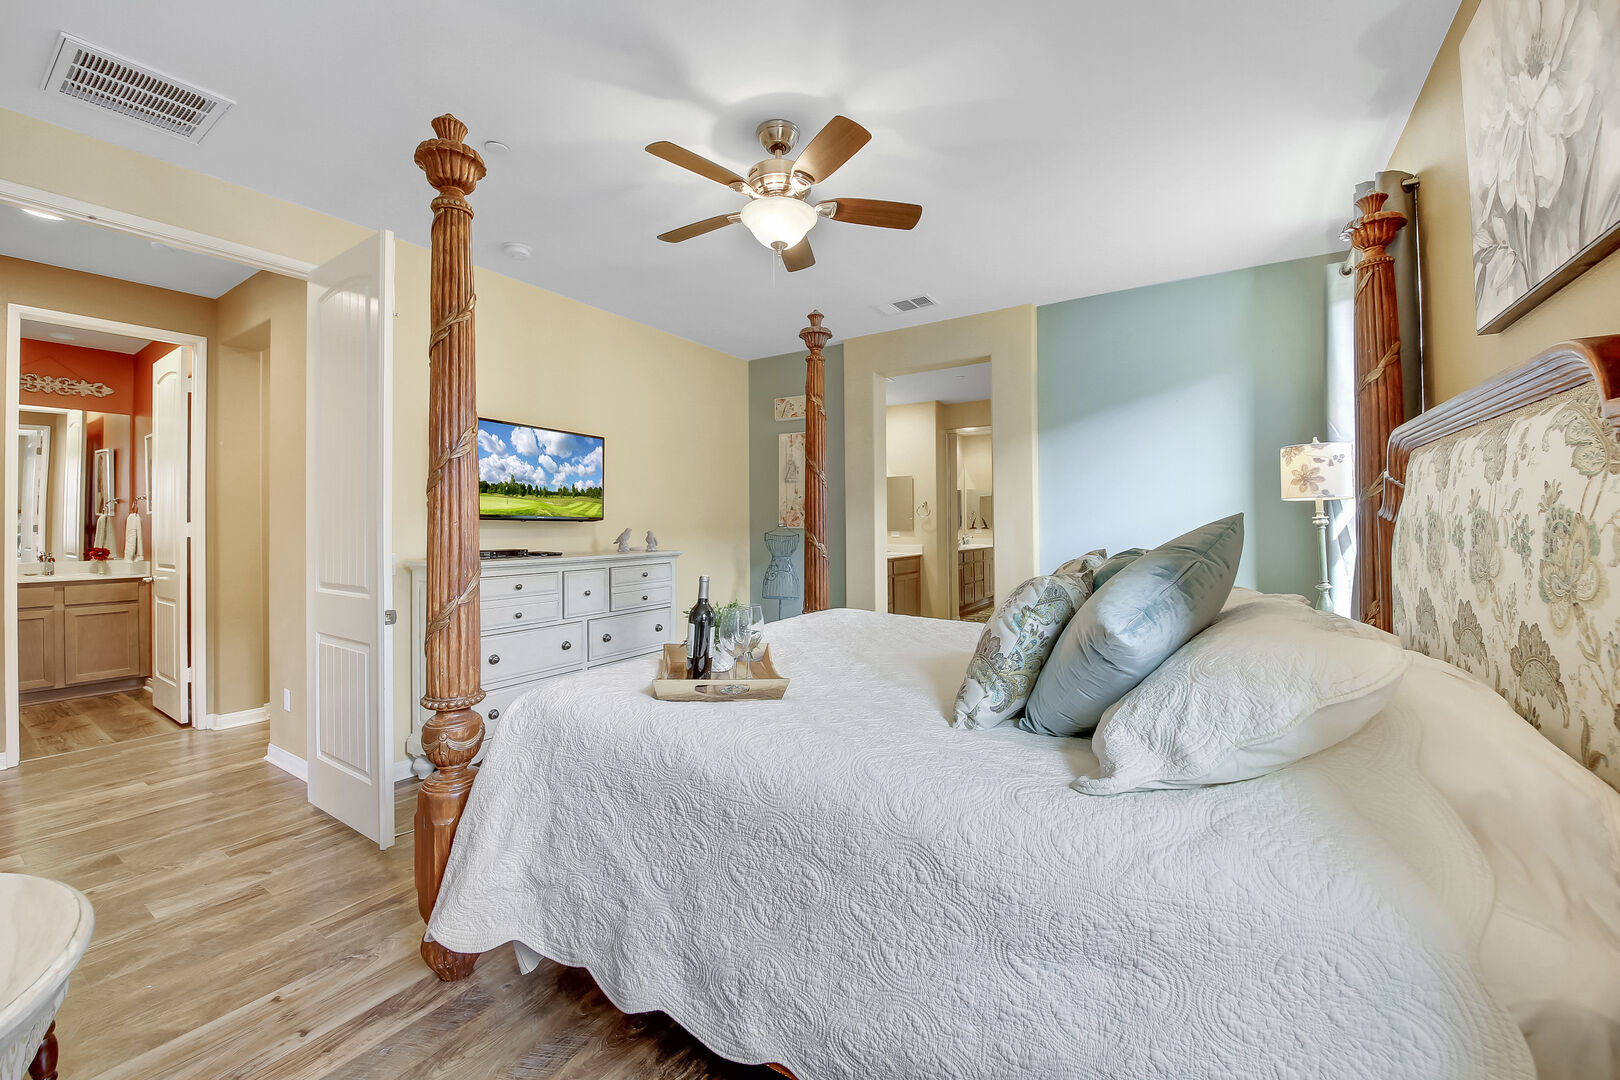 Master Suite 1 is located to the right of the entryway and features a Cal King-sized Bed.